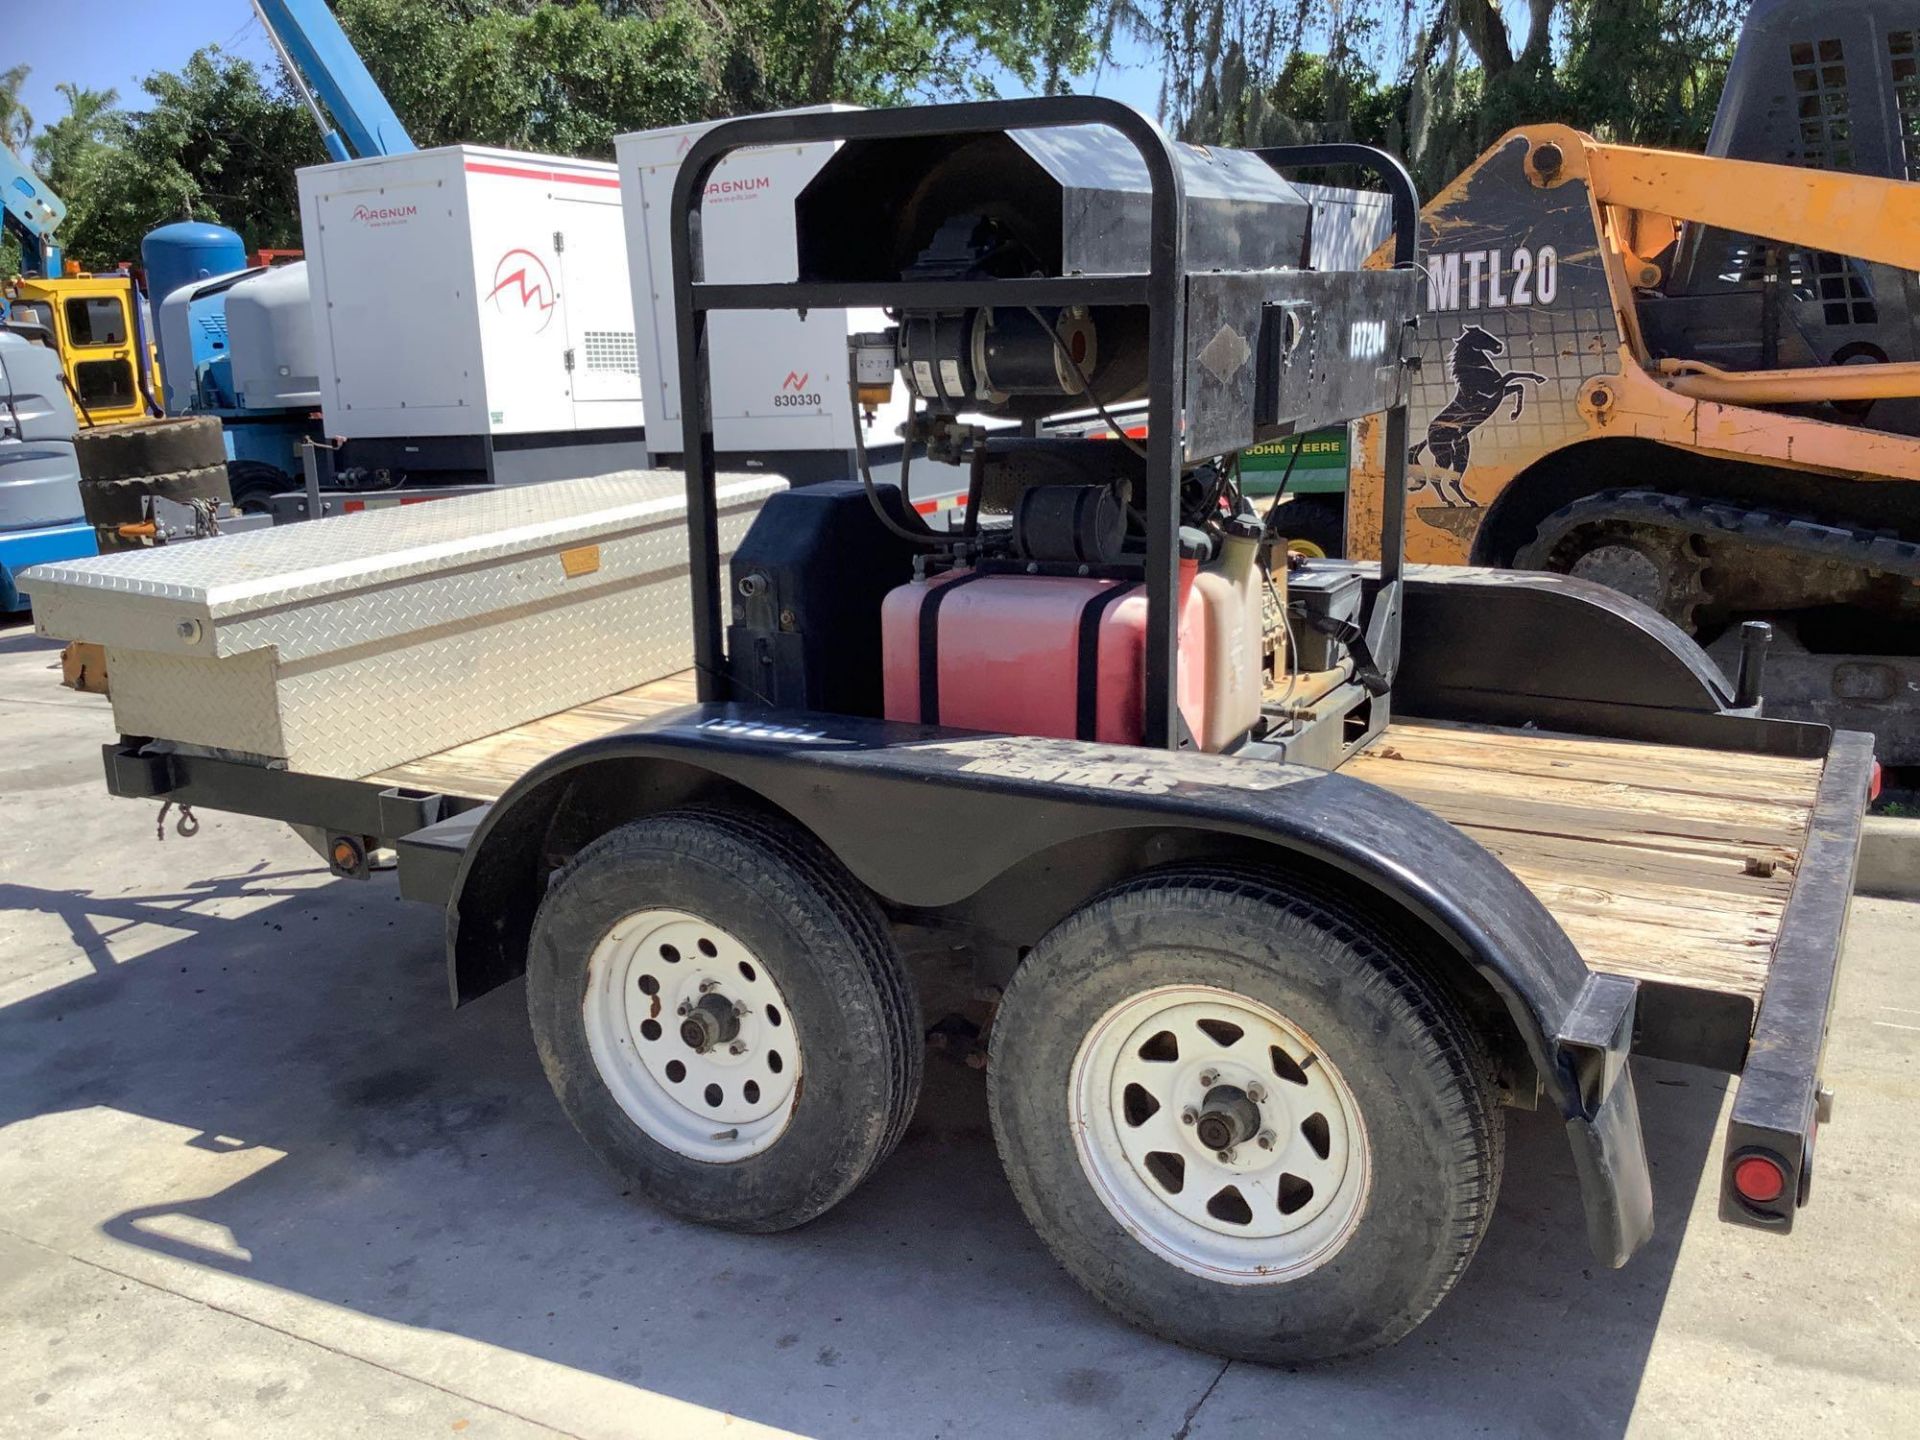 TRAILER MOUNTED HEATED PRESSURE WASHER SYSTEM, DUAL AXLE TRAILER, STORAGE BOX, BILL OF SALE ONLY, RU - Image 5 of 17